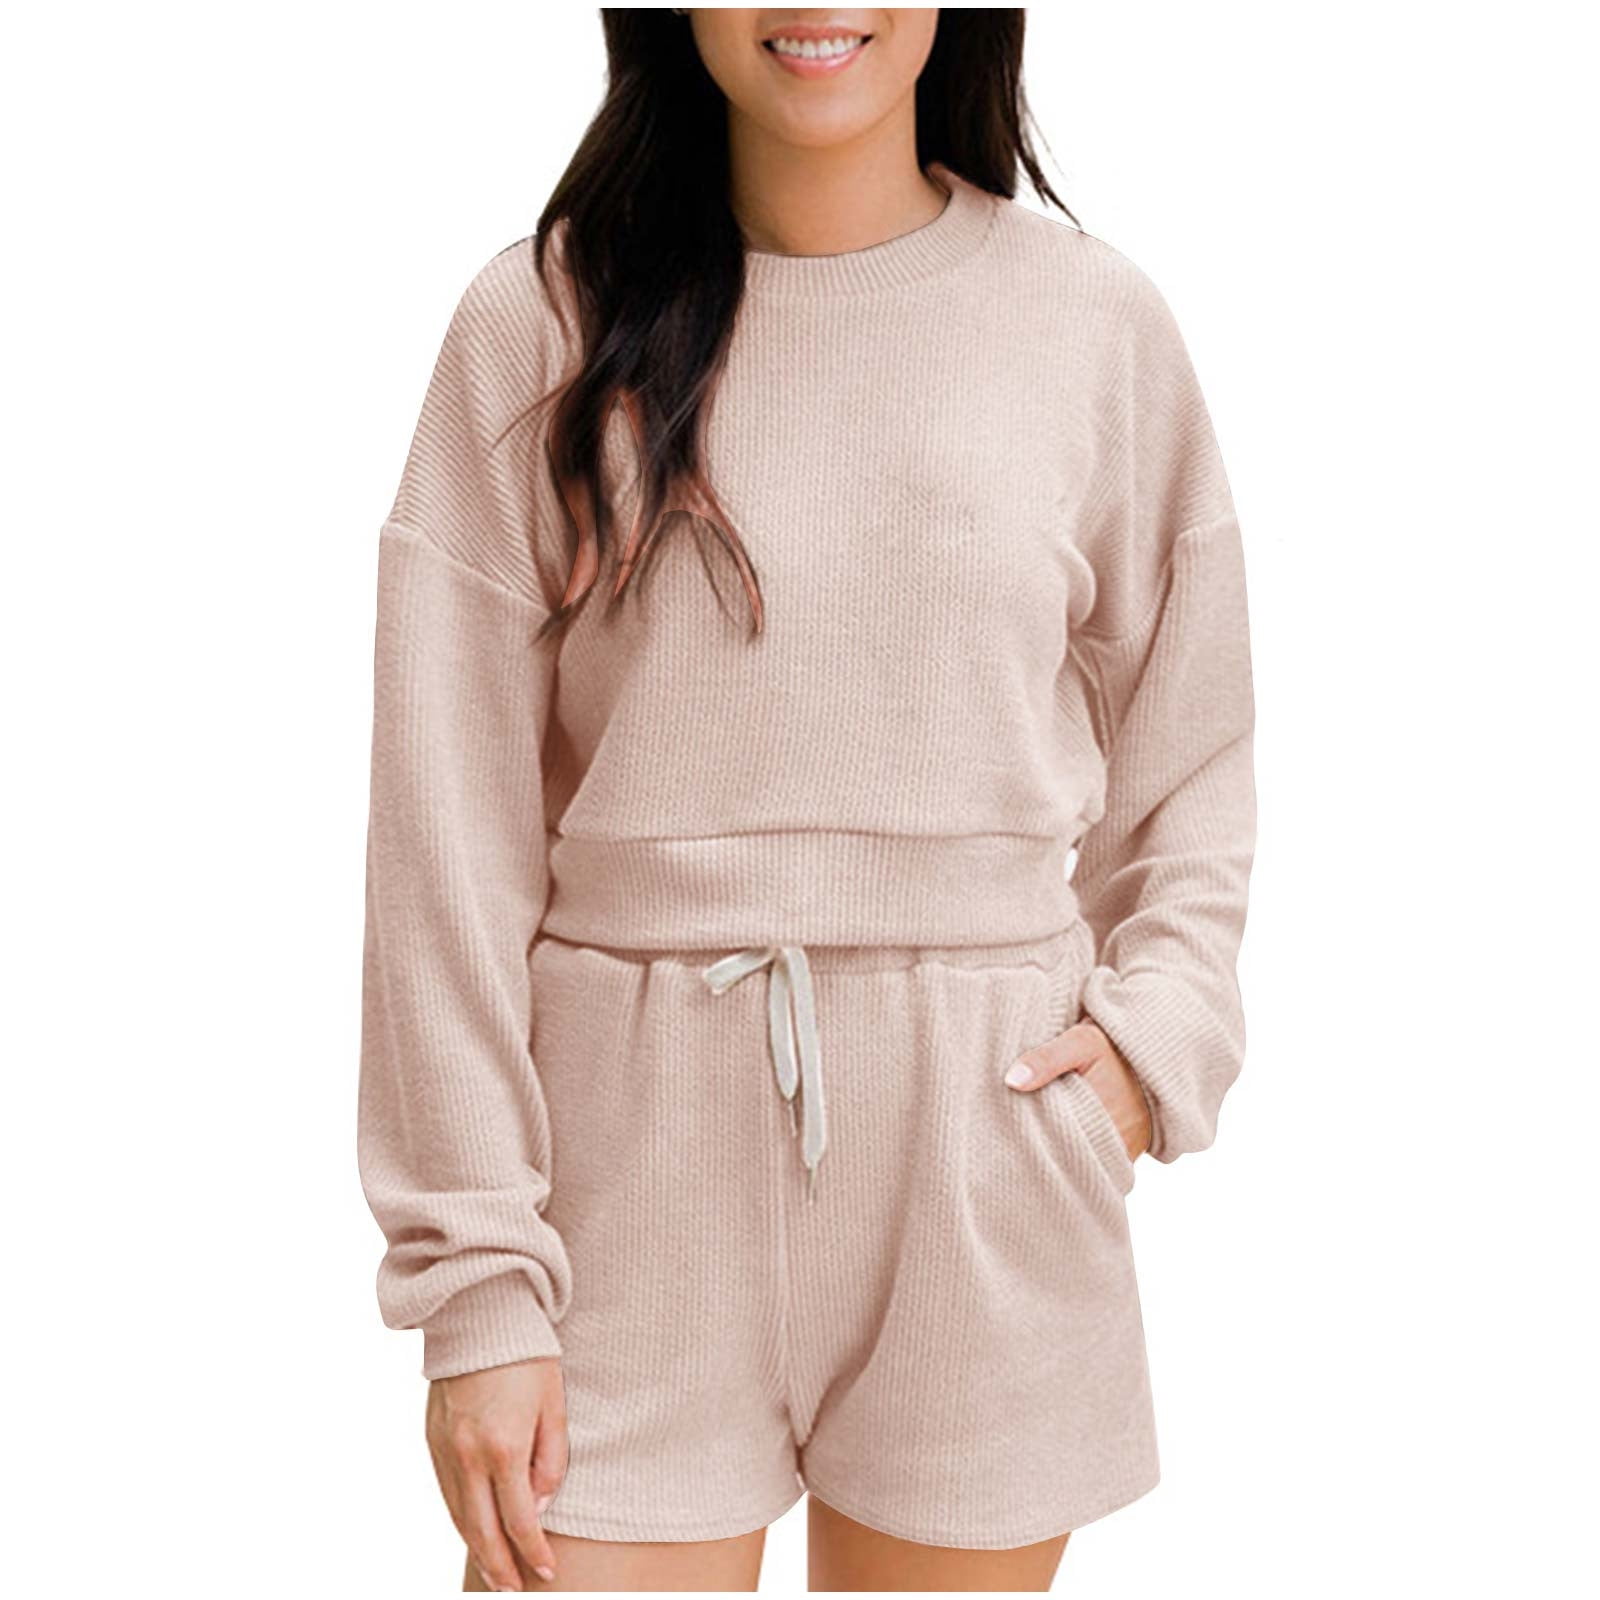 ameIAEA Women's 2 Piece Lounge Sets Knitted Long Sleeve Pullover ...